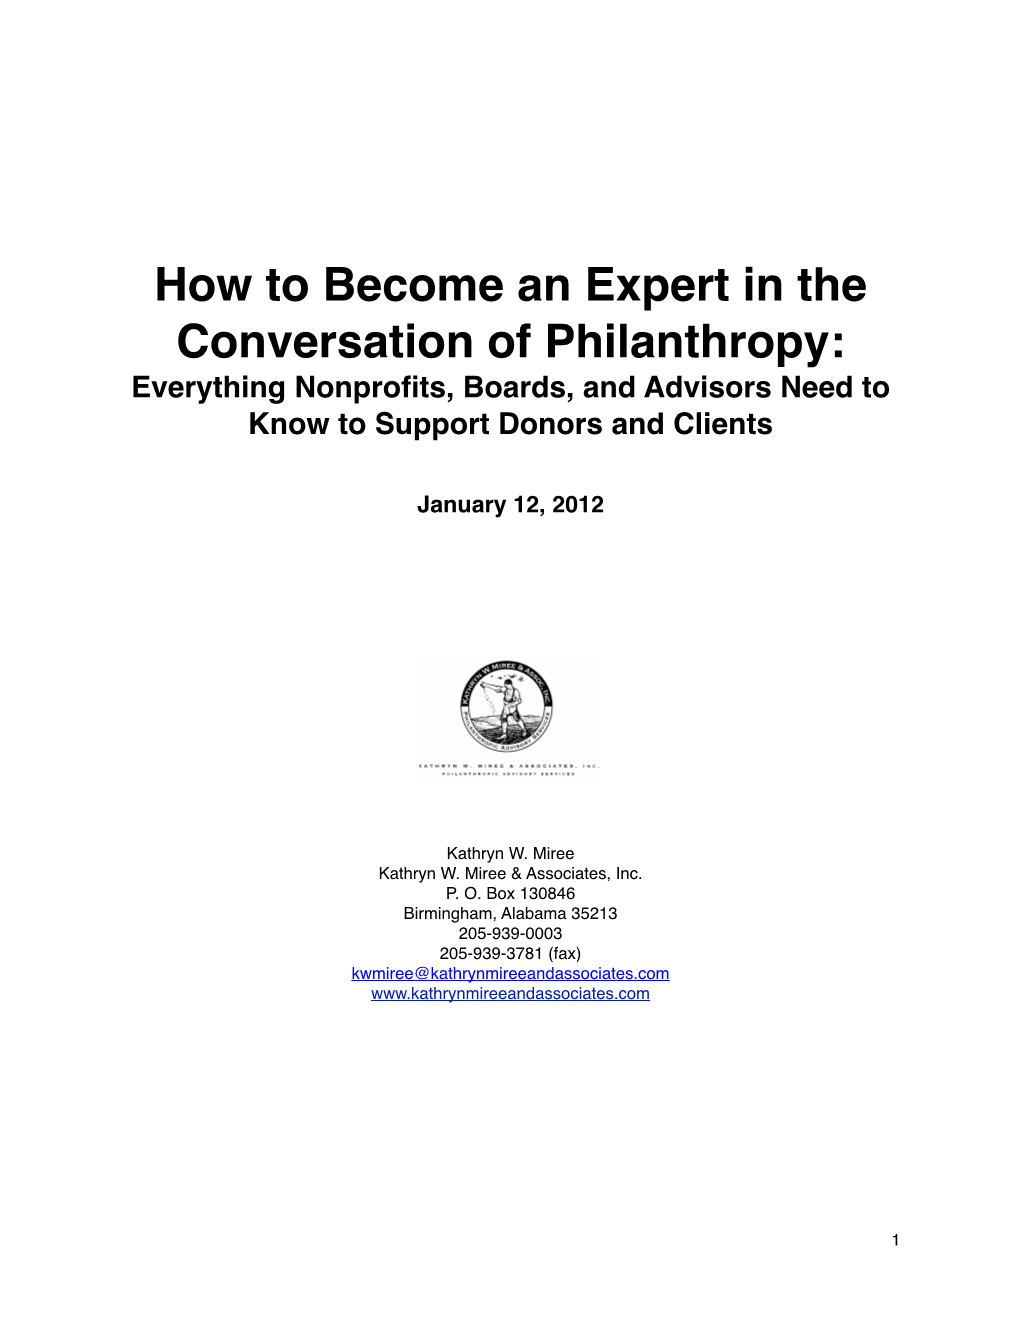 How to Become an Expert in the Conversation of Philanthropy: Everything Nonproﬁts, Boards, and Advisors Need to Know to Support Donors and Clients